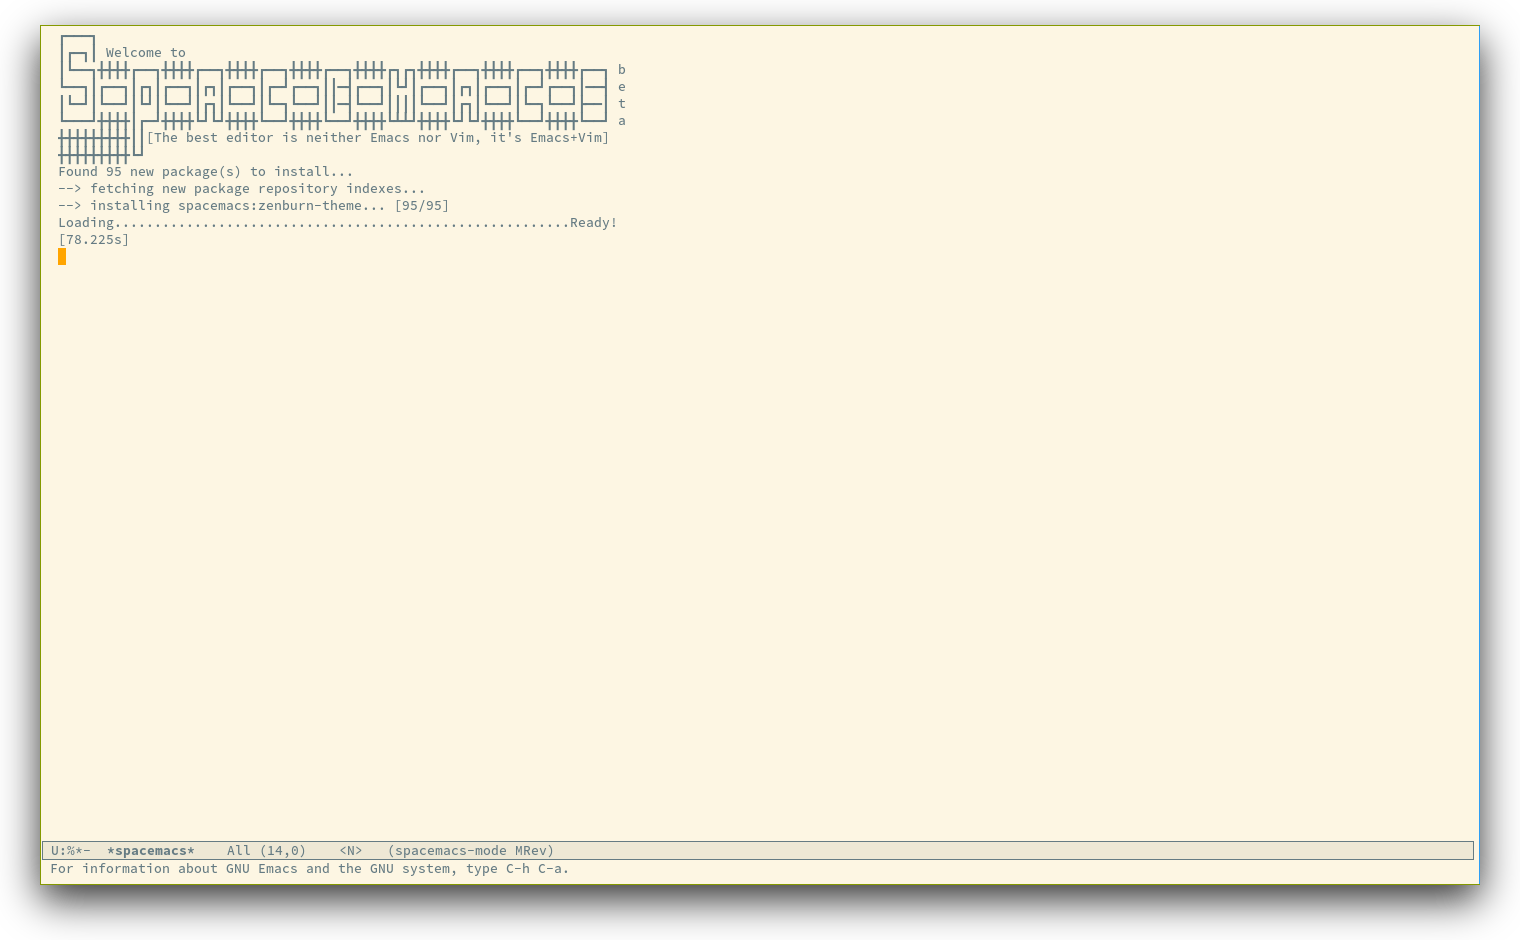 /TakeV/spacemacs/media/commit/9213c6b7f2d35b50f397c11bcffa45a167202af2/doc/img/spacemacs-startup.png